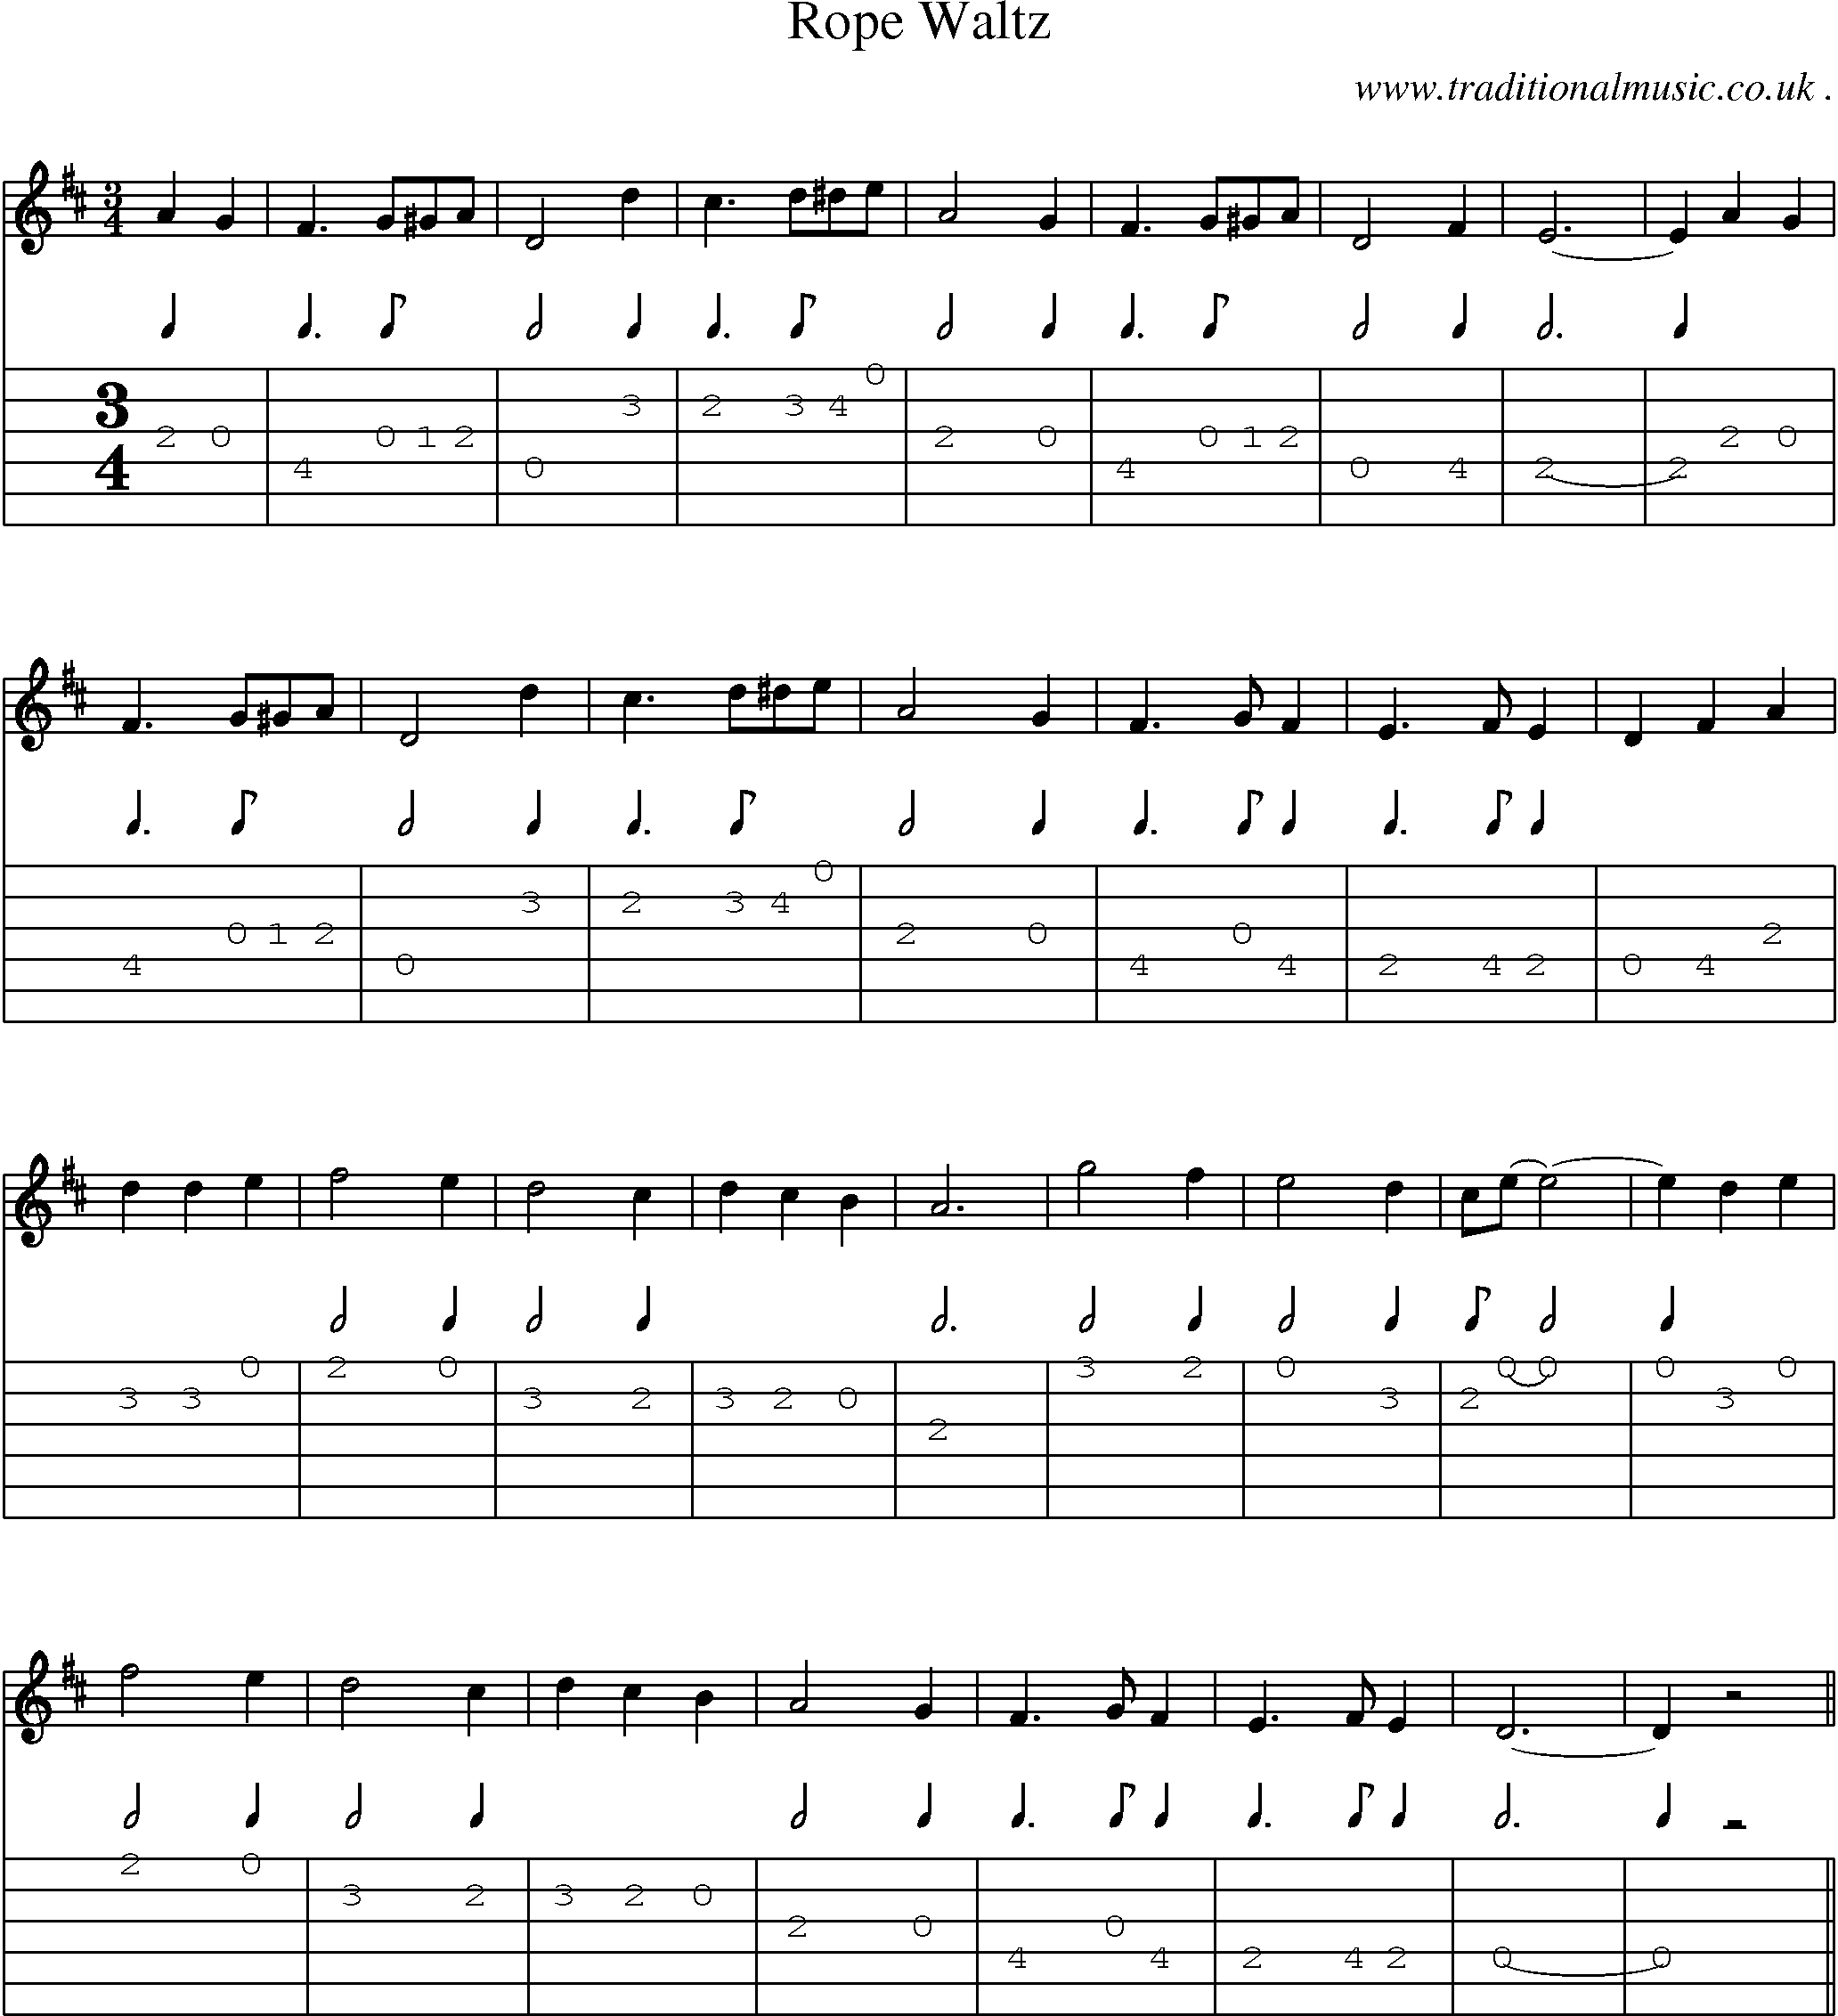 Sheet-Music and Guitar Tabs for Rope Waltz